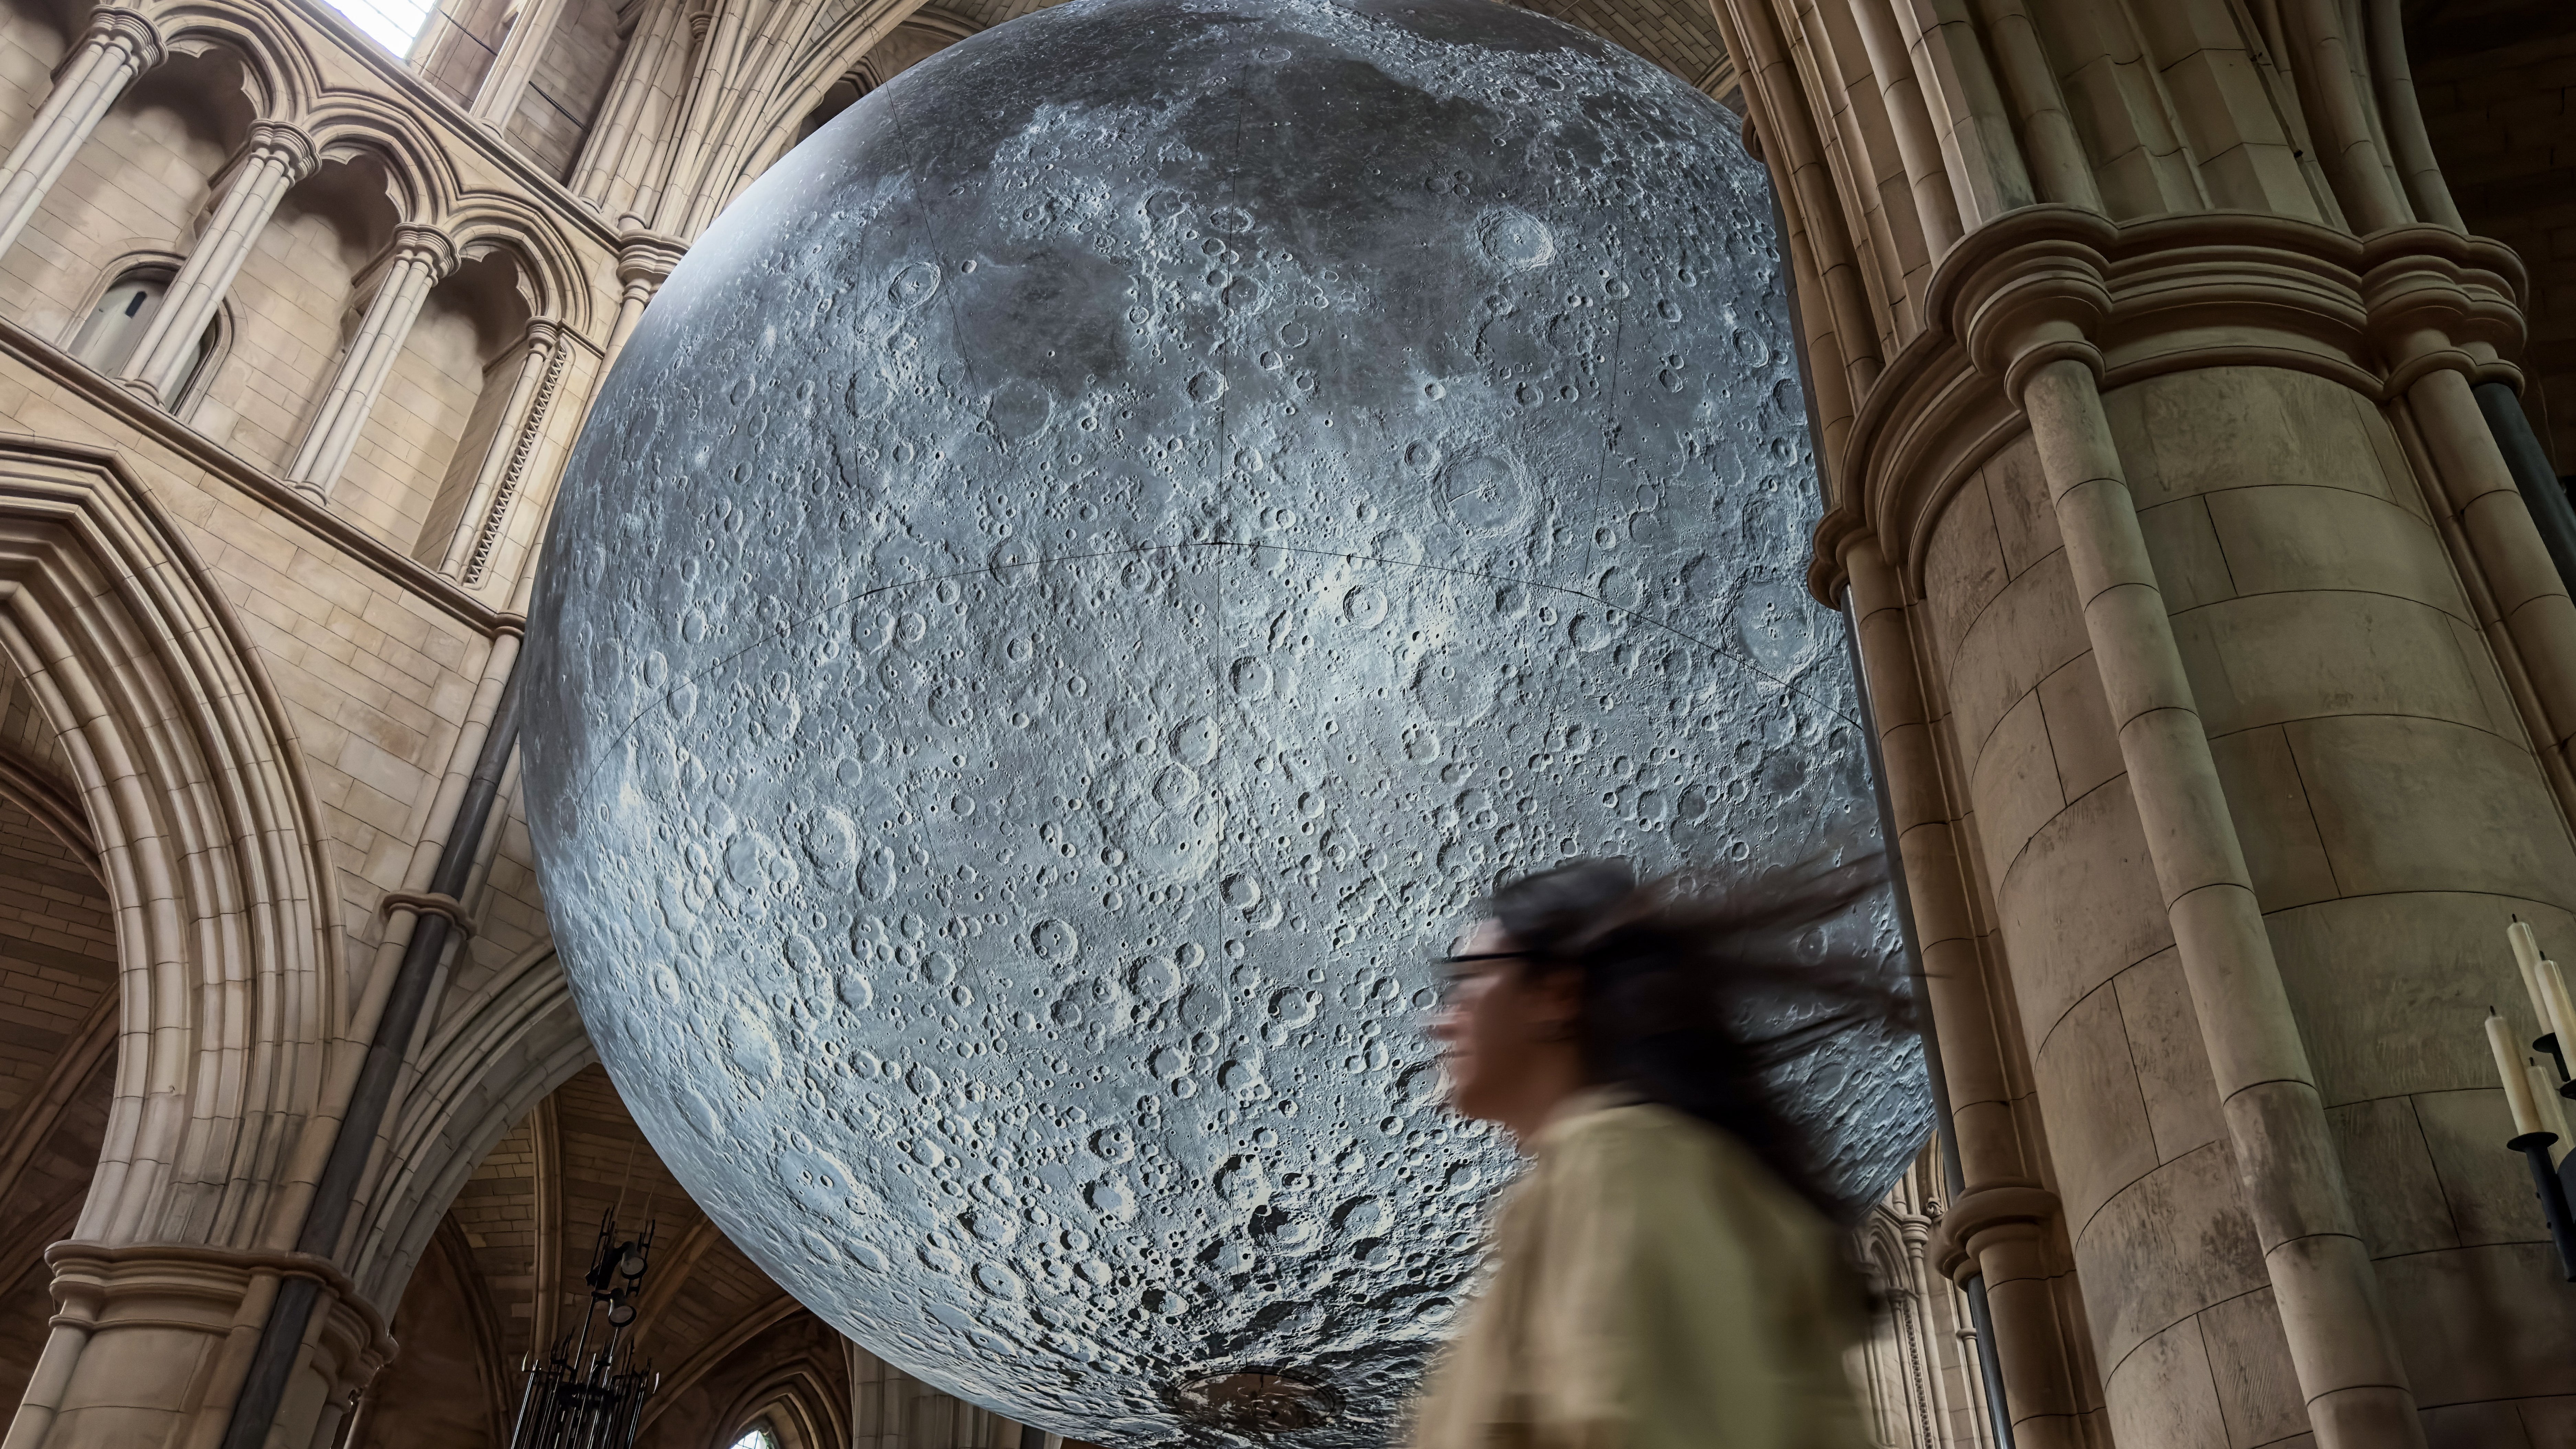 Most Brits incorrectly believe the moon is round when it is in fact egg-shaped